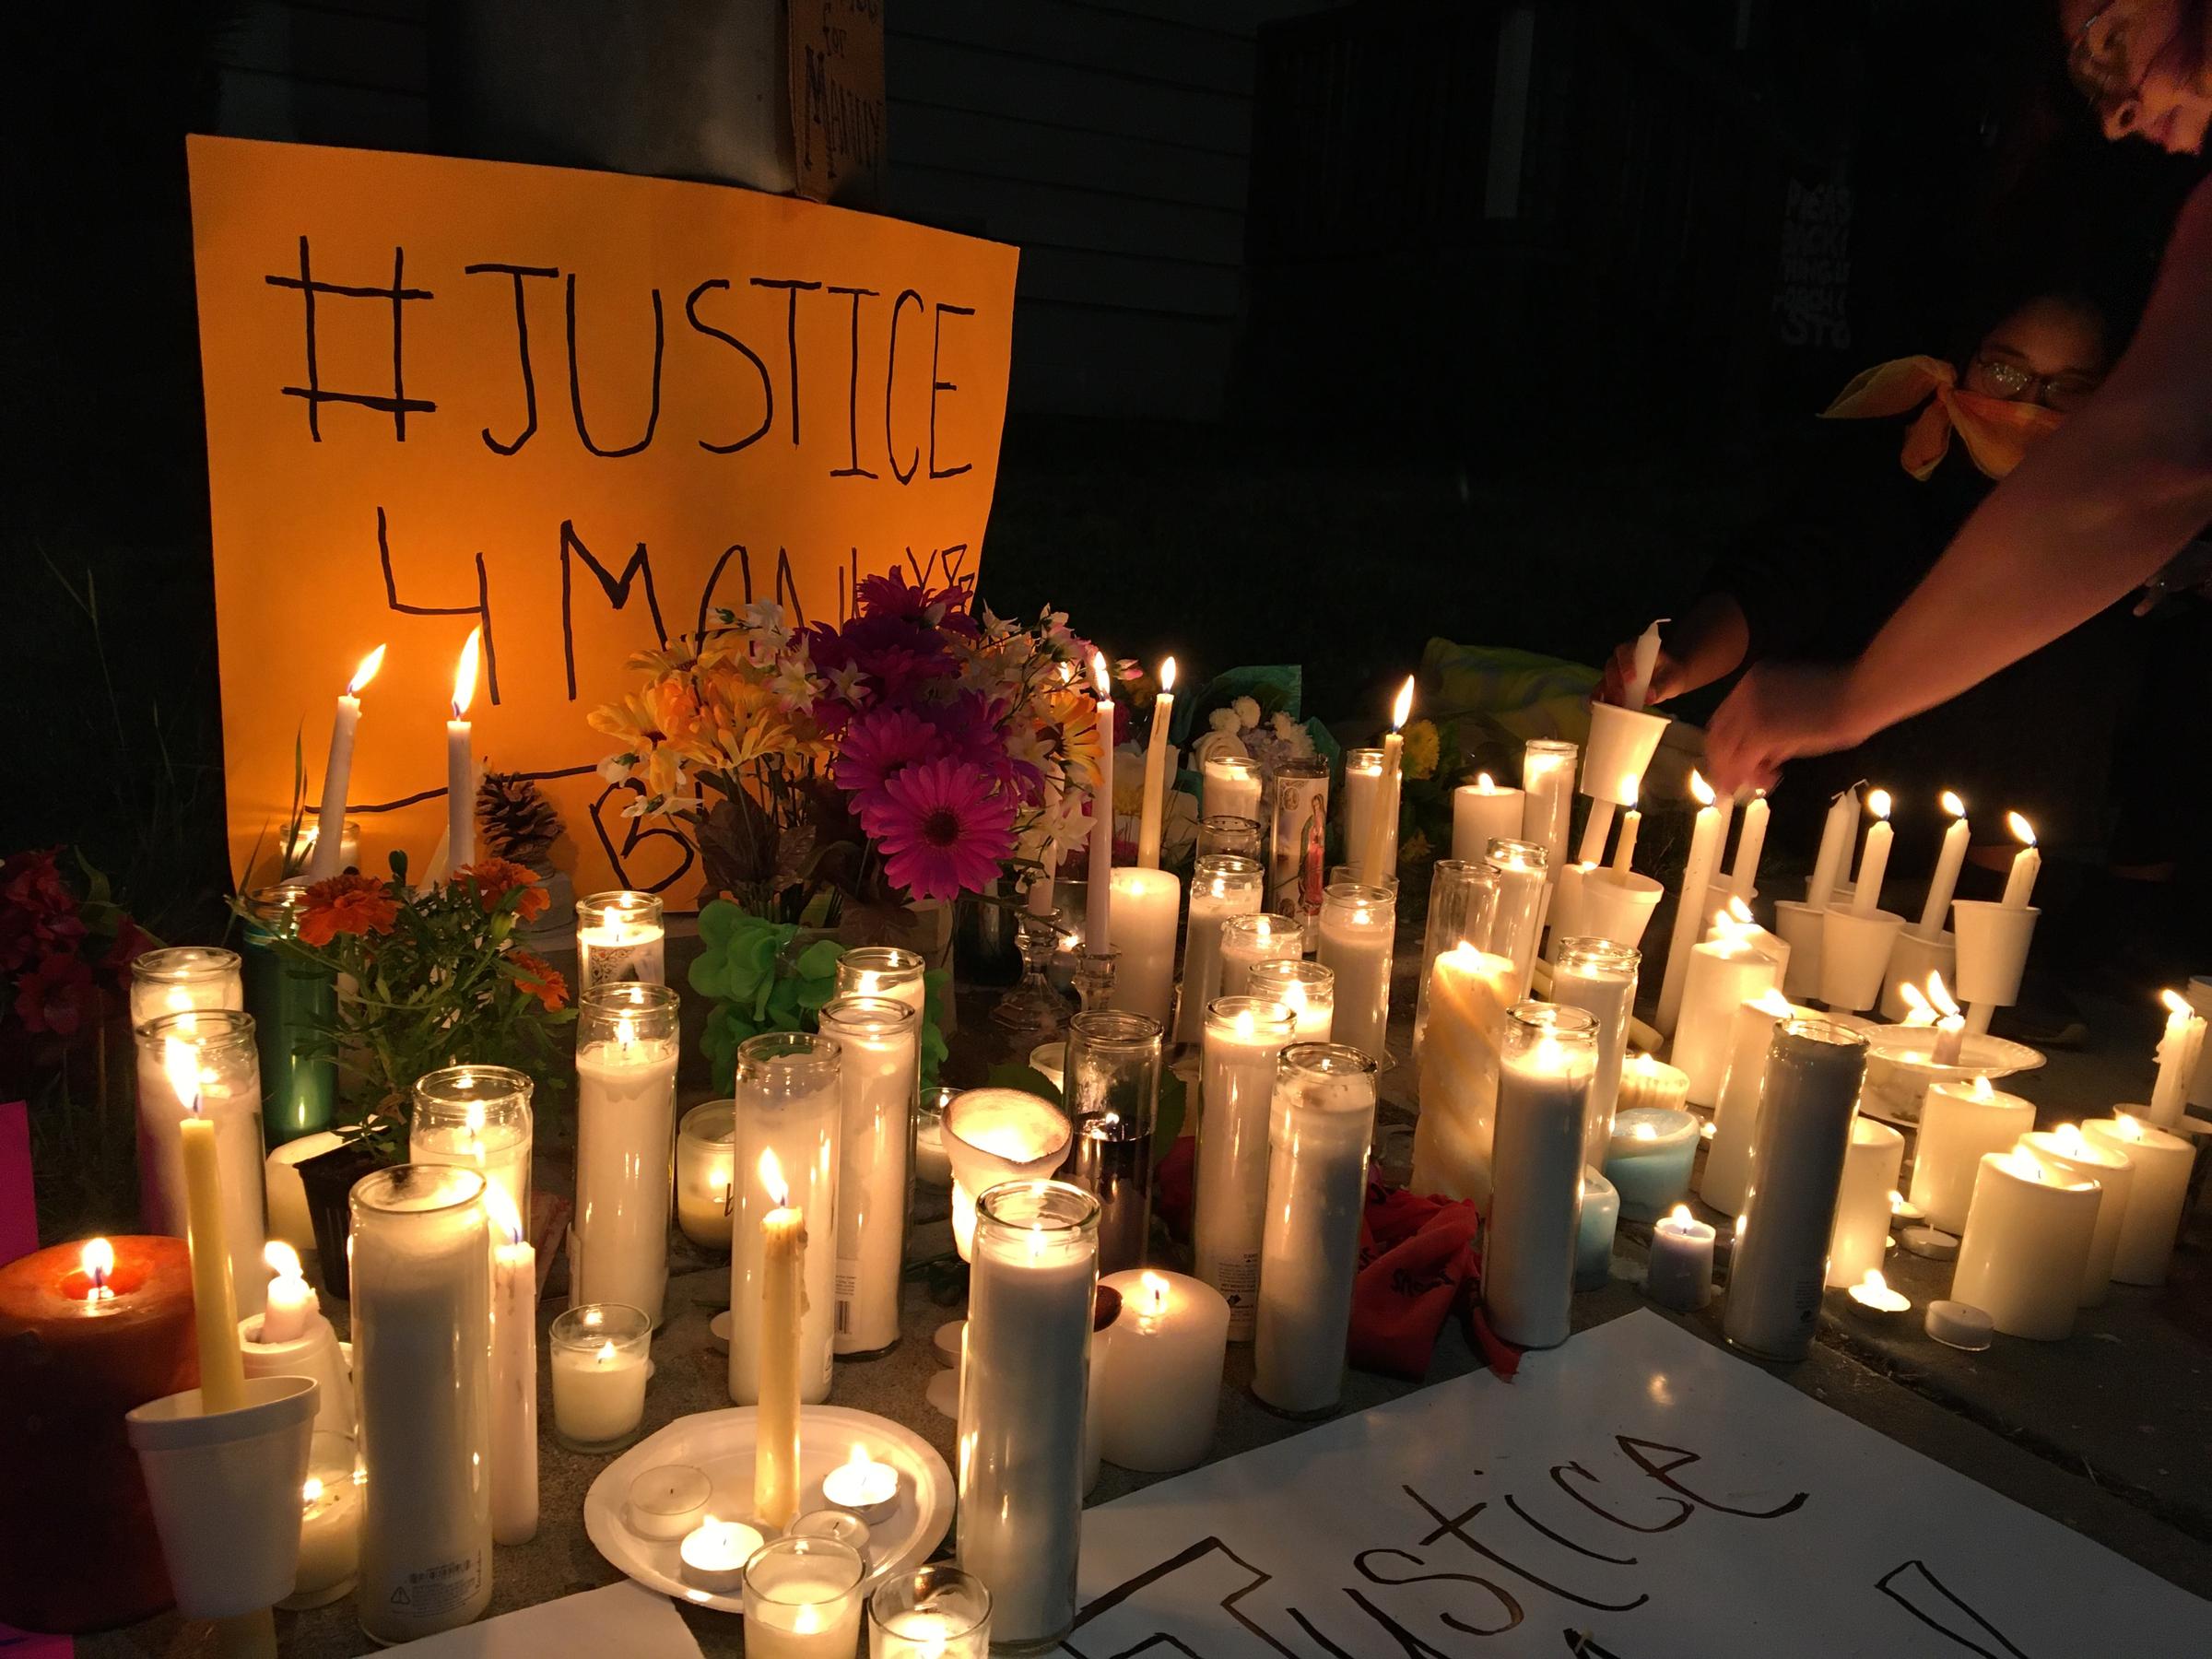 Hundreds gathered at a vigil Wednesday night to remember Manuel Ellis, who died March 3 in the custody of Tacoma police officers. His death has been ruled a homicide by the Pierce County medical examiner, and the officers have been placed on leave. CREDIT: Will James/KNKX